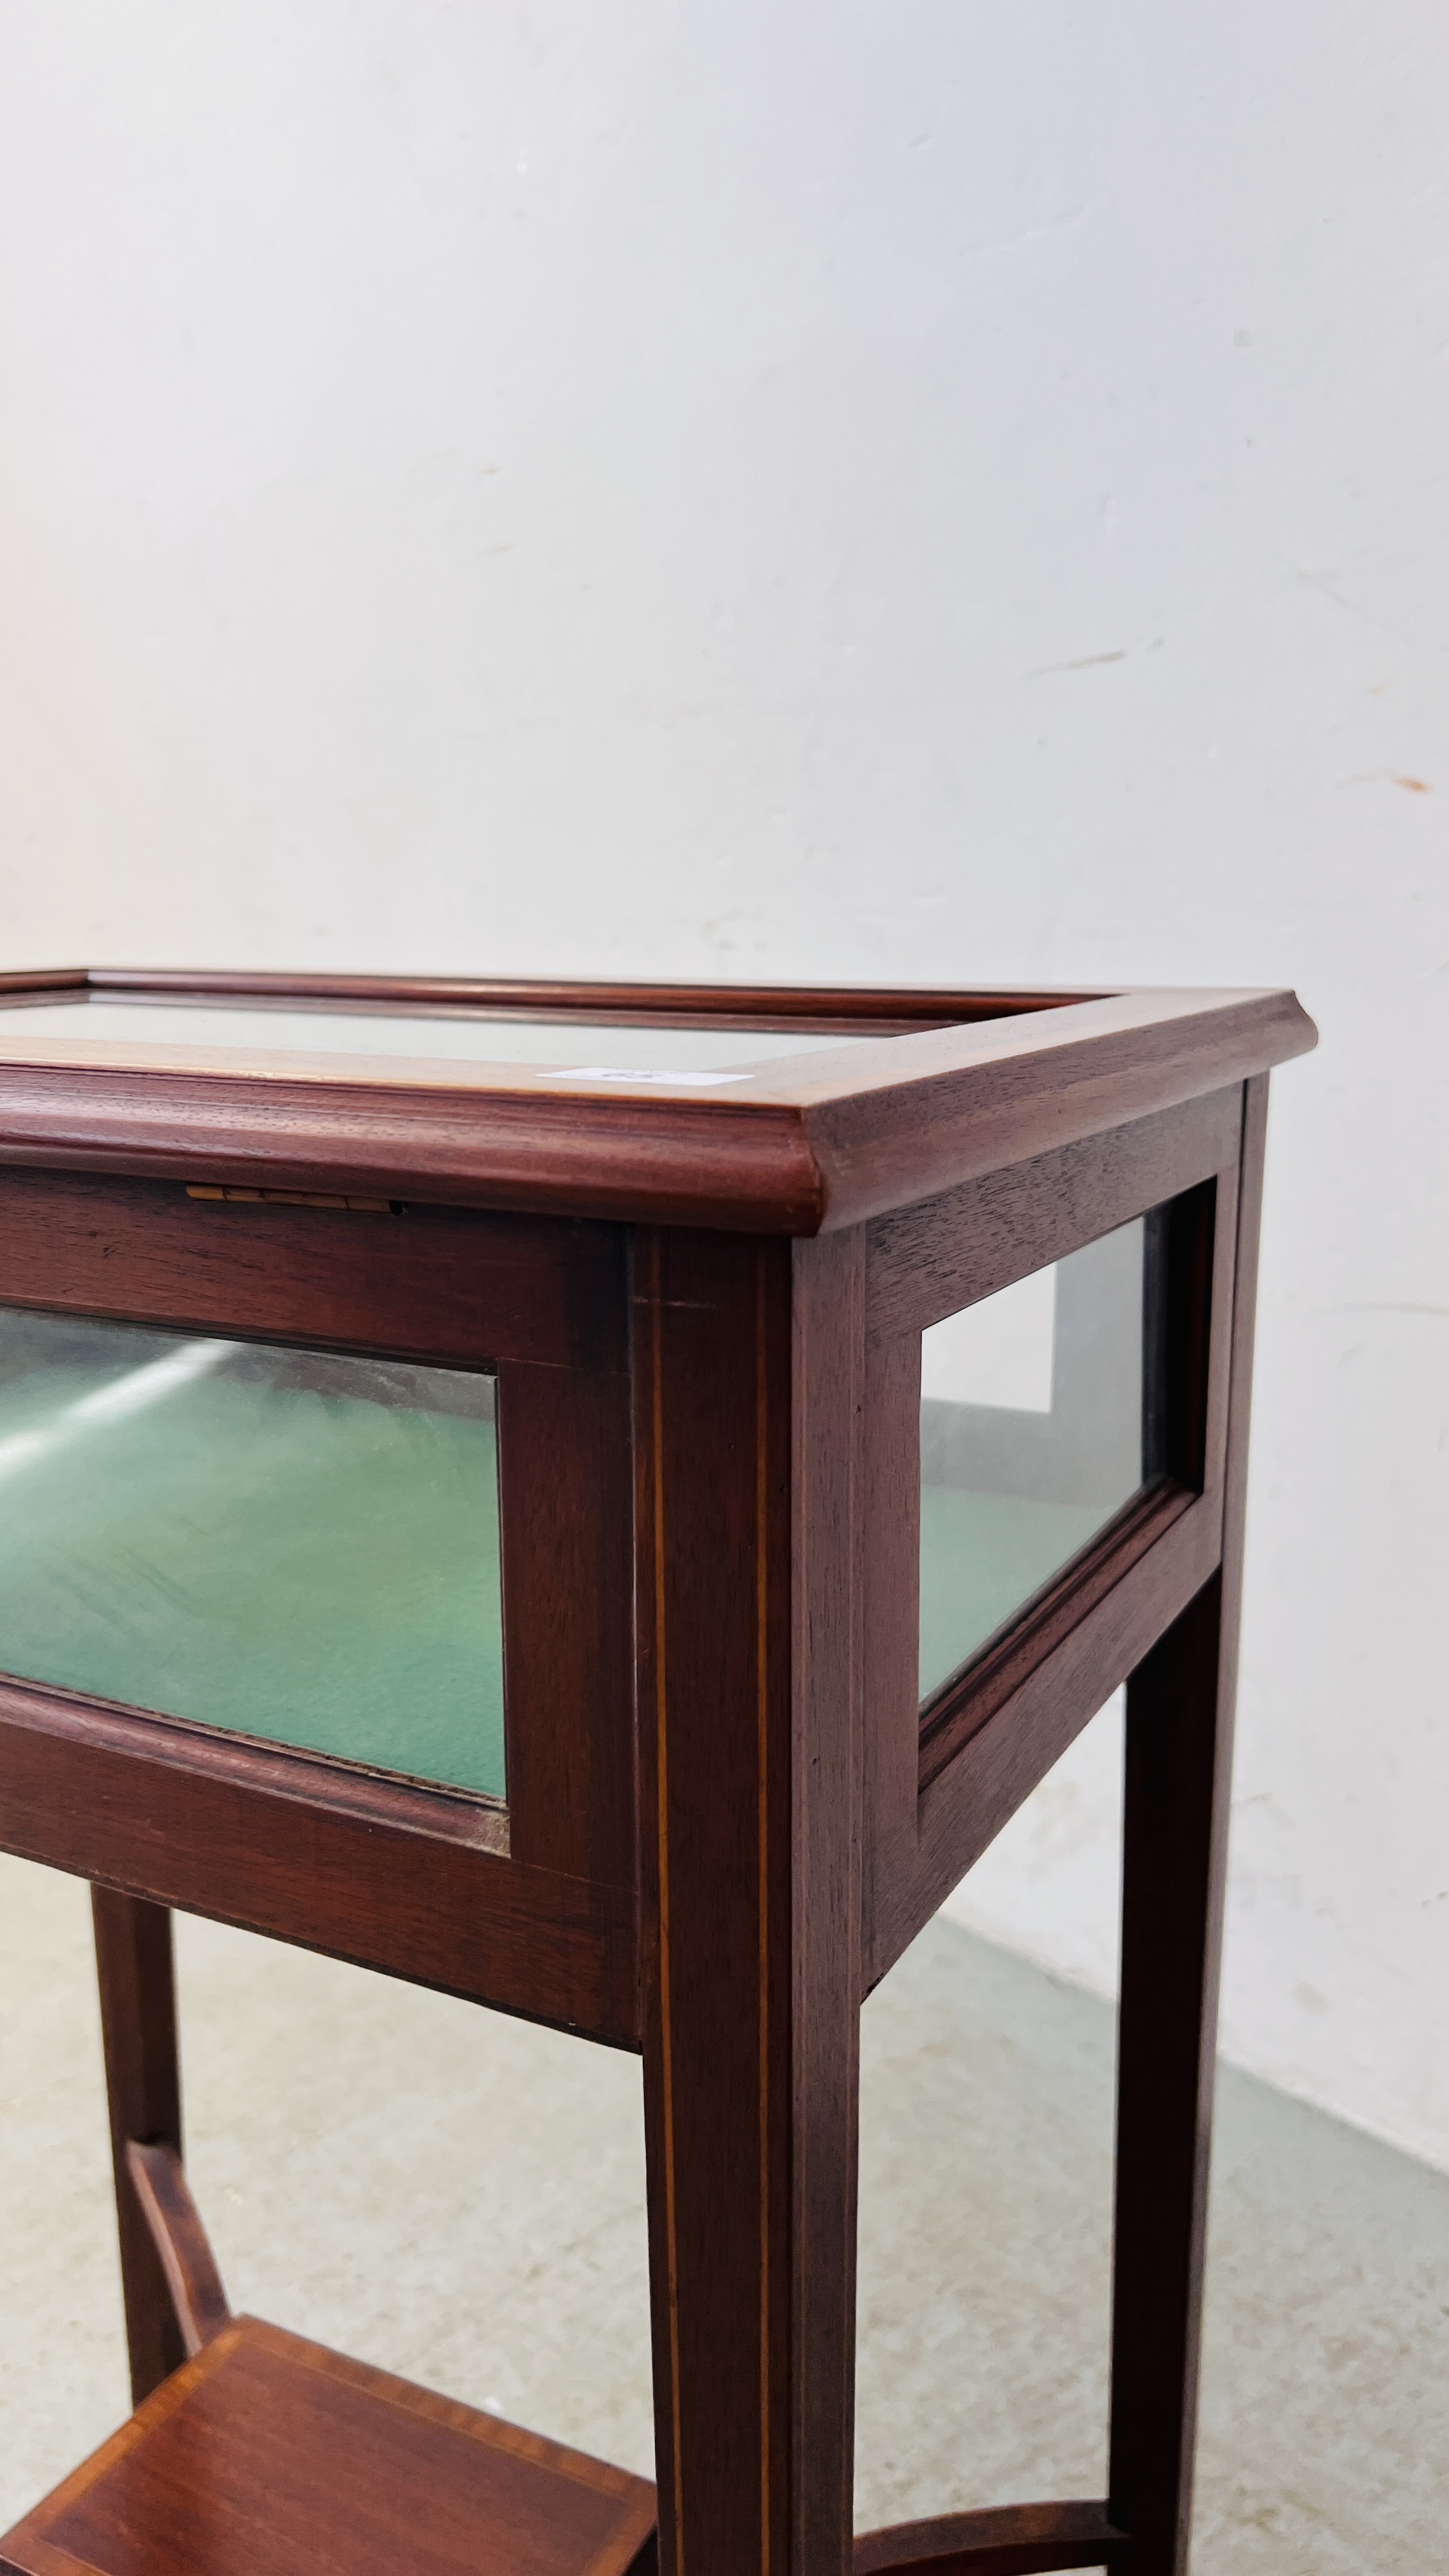 A MAHOGANY AND INLAID GLASS CASED FLOOR STANDING DISPLAY CASE W 57CM. H 76CM. D 40CM. - Image 4 of 11